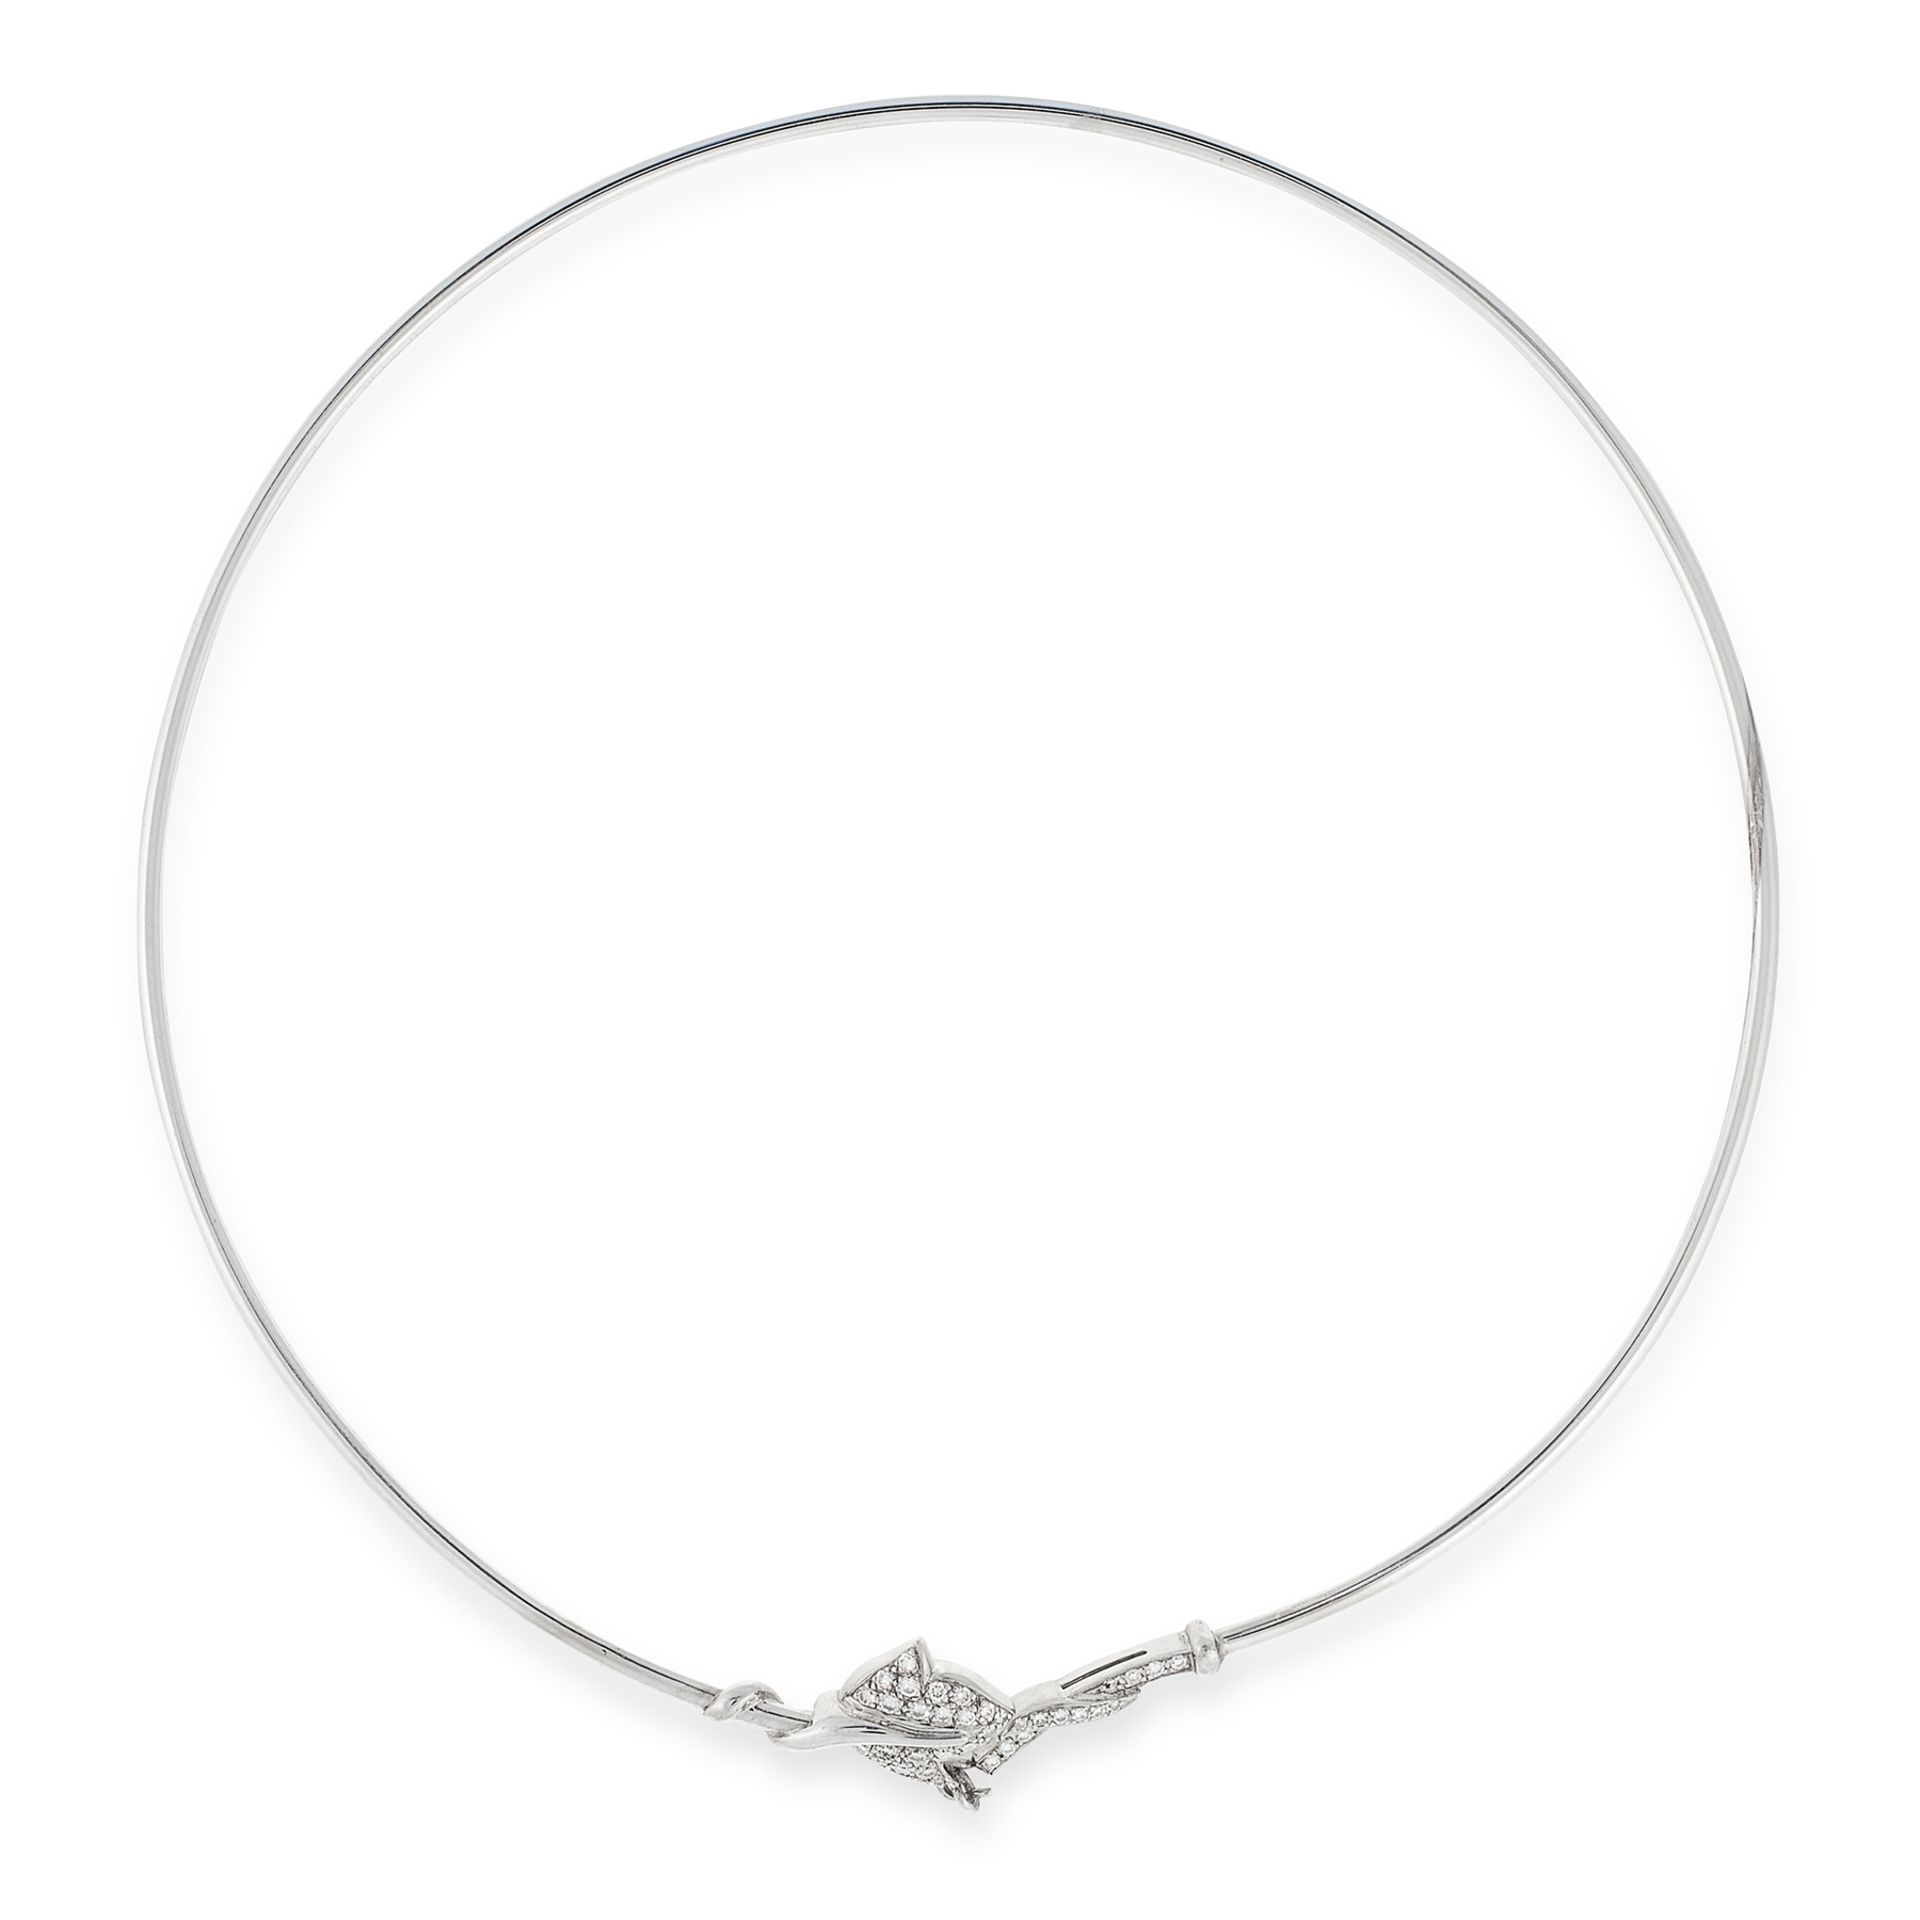 A DIAMOND COLLAR TORQUE NECKLACE in 18ct white gold, formed of a single piece of gold coiled